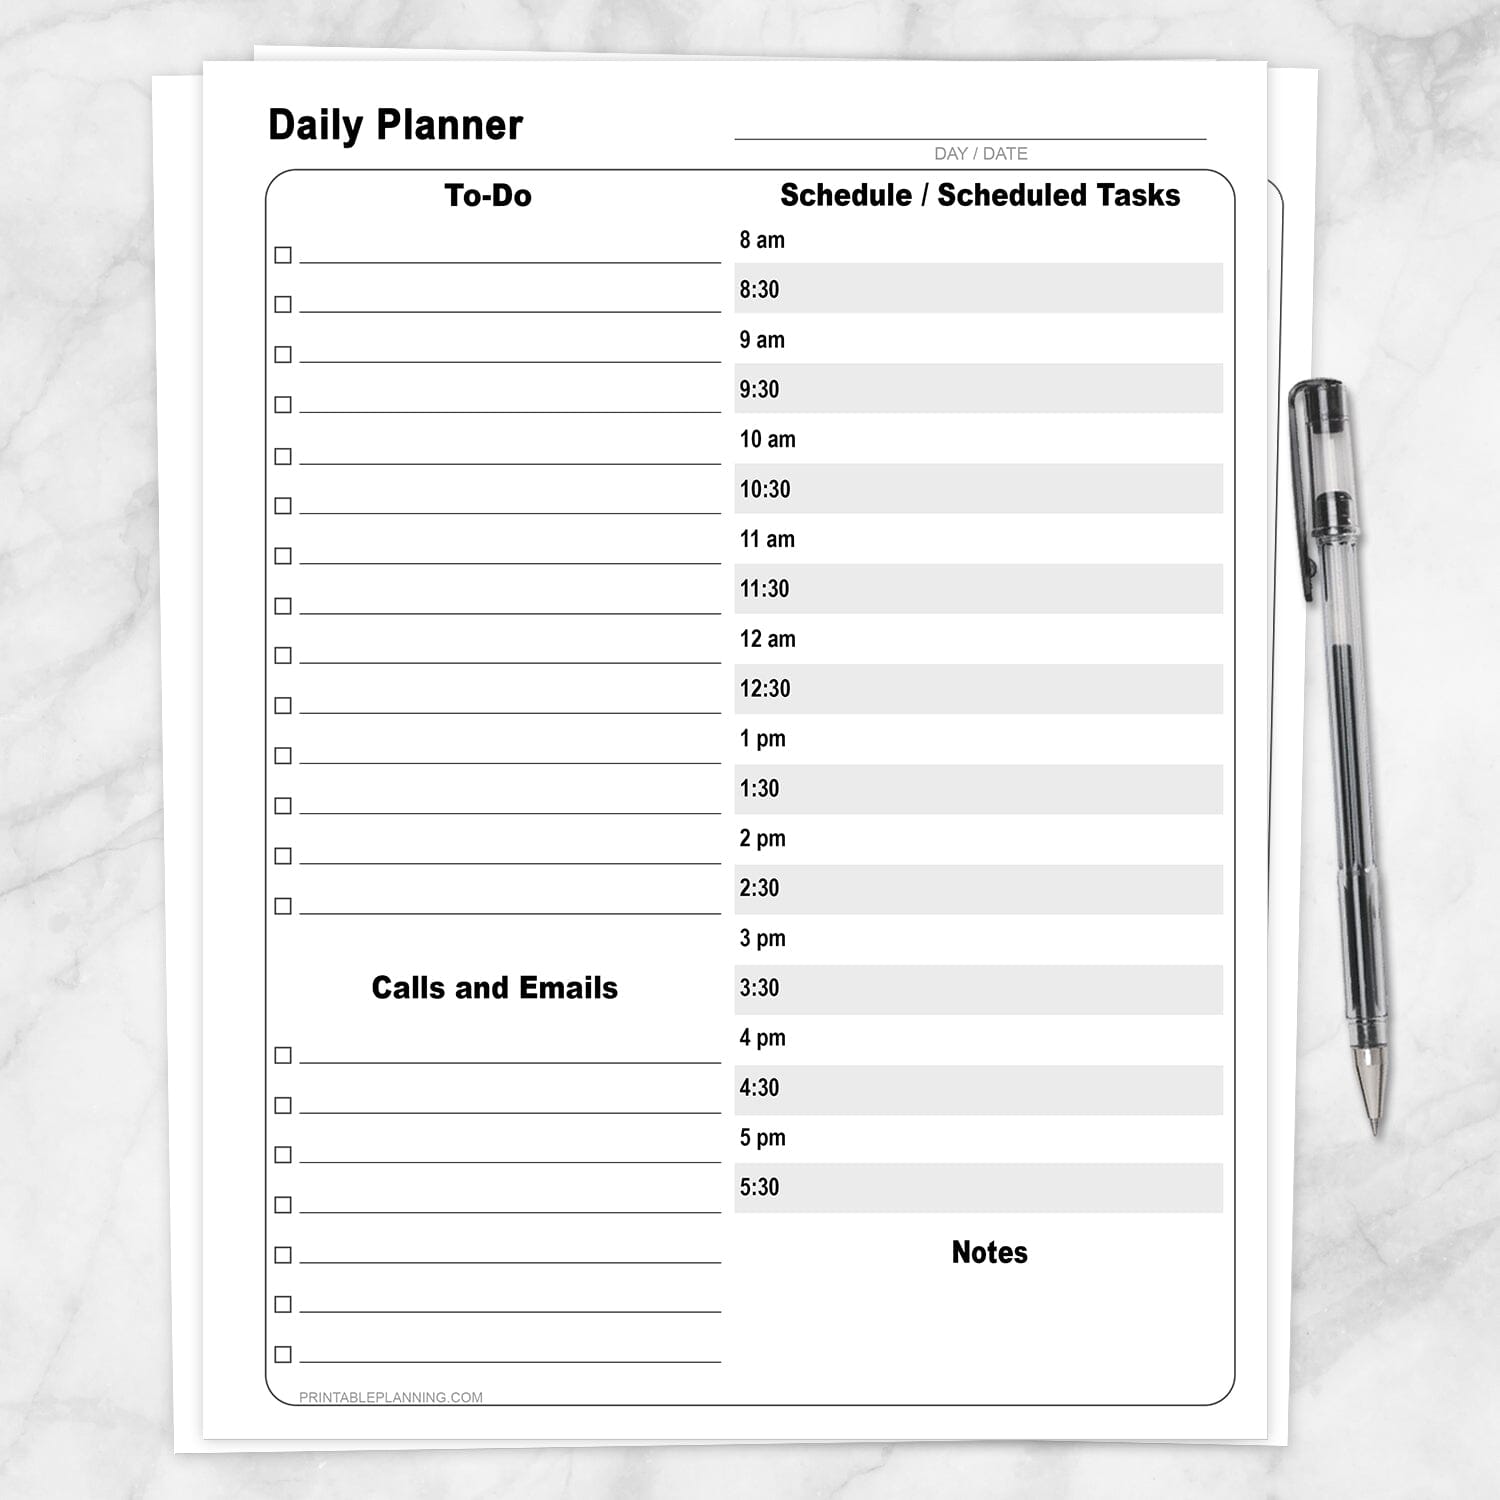 Printable Business Daily Planner with To-Do List and Schedule at Printable Planning. 